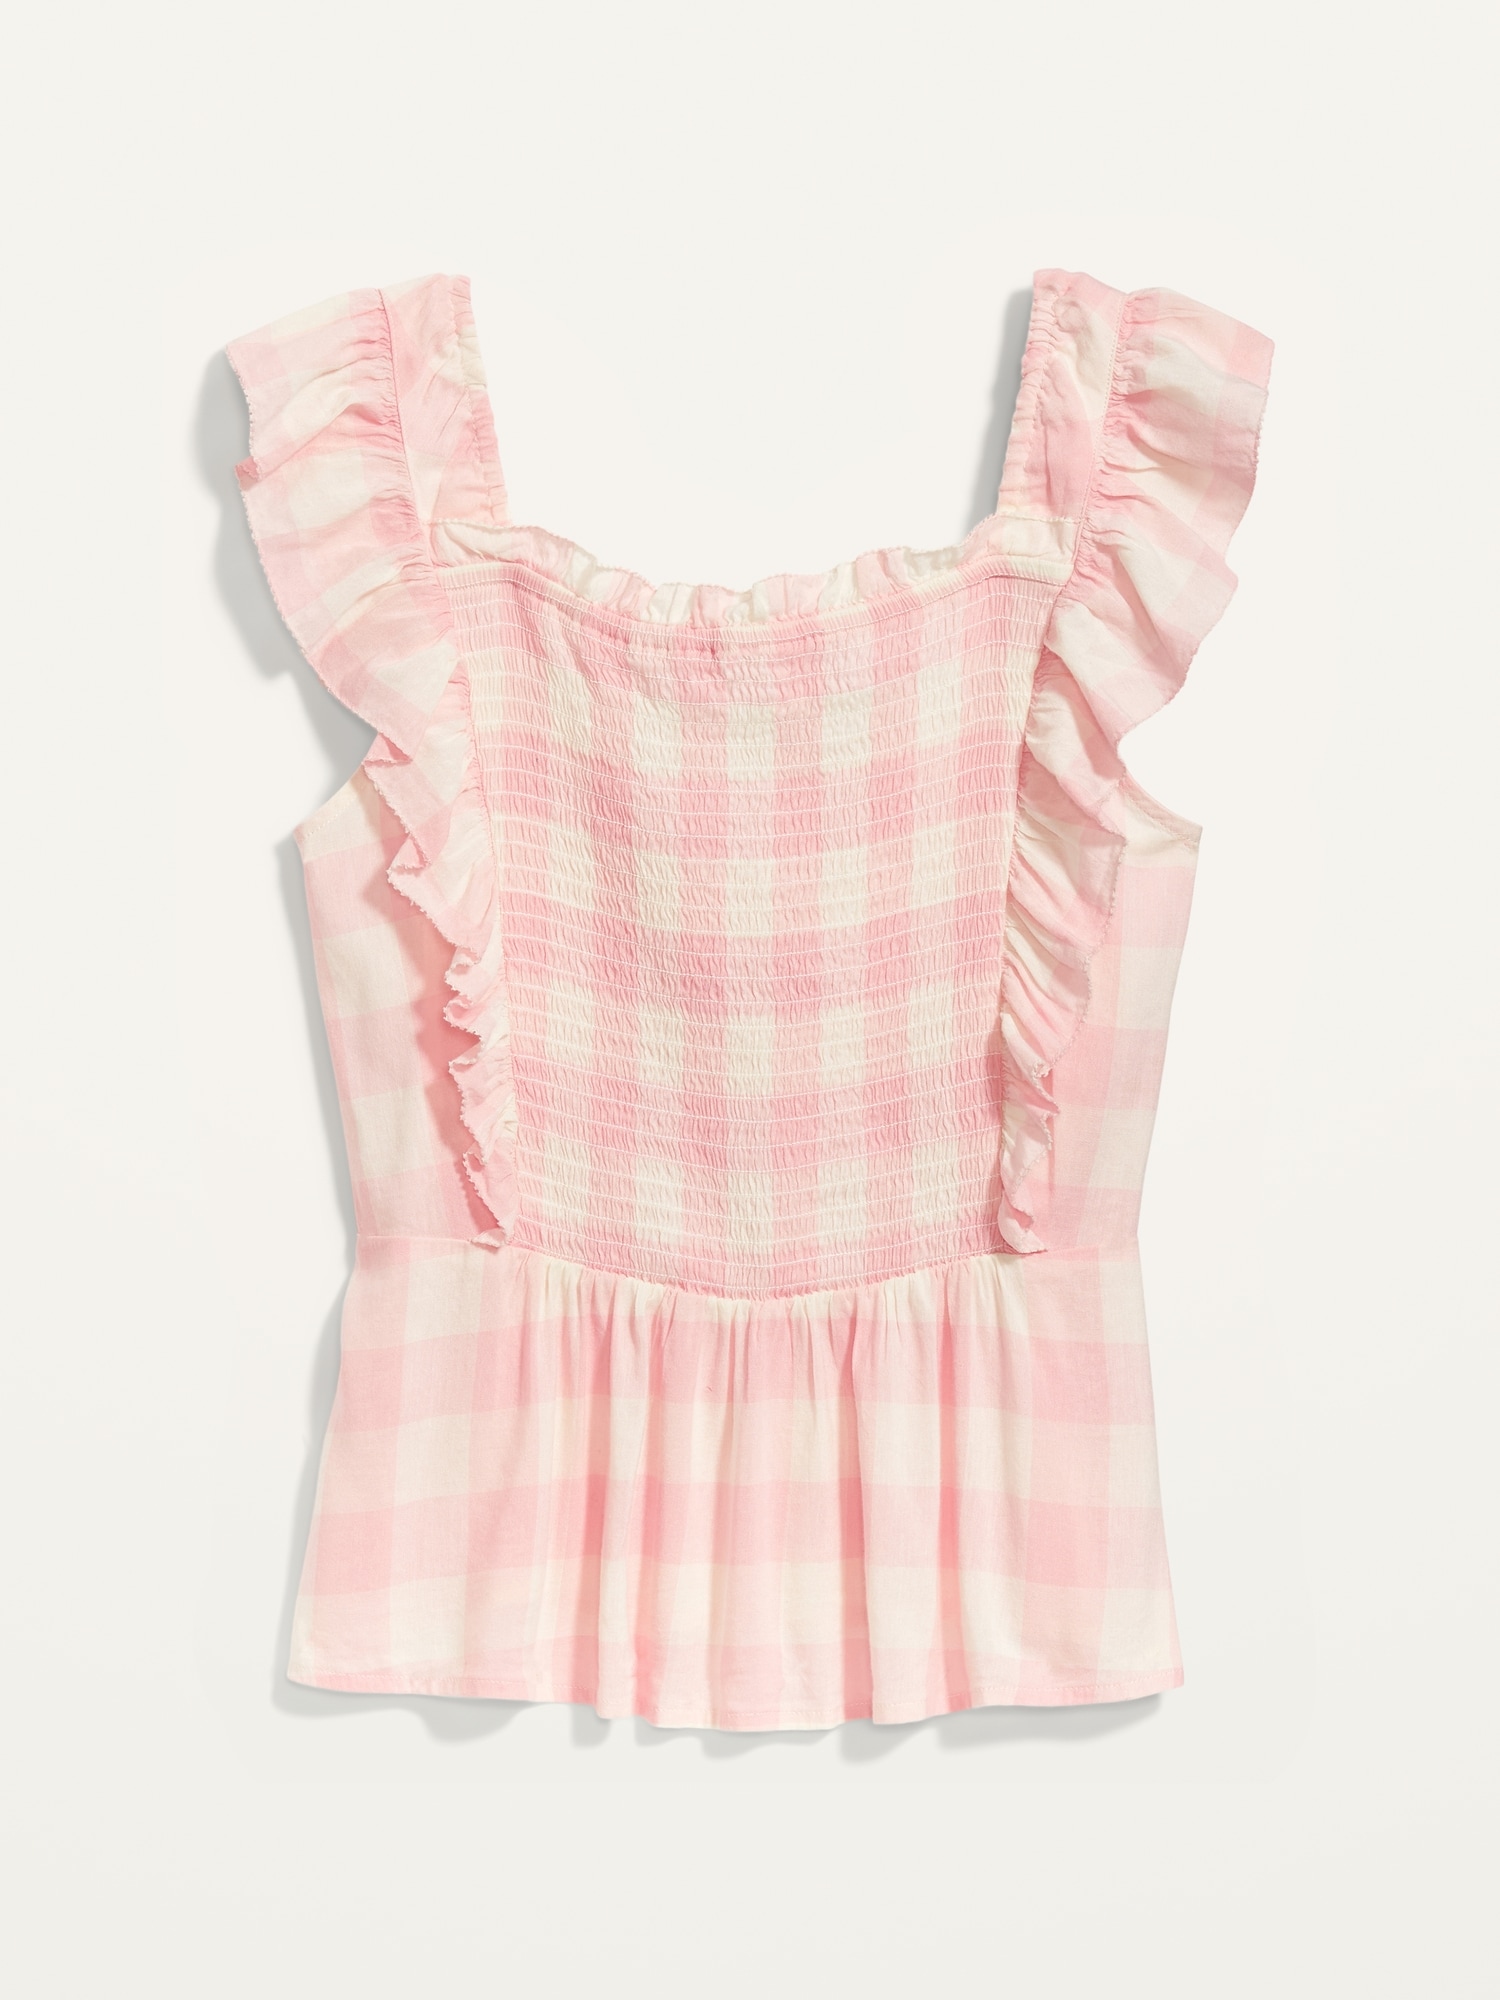 Gingham Ruffle Trim Tie Back Halter Top  Halter tops outfit, Girls fashion  clothes, Top outfits